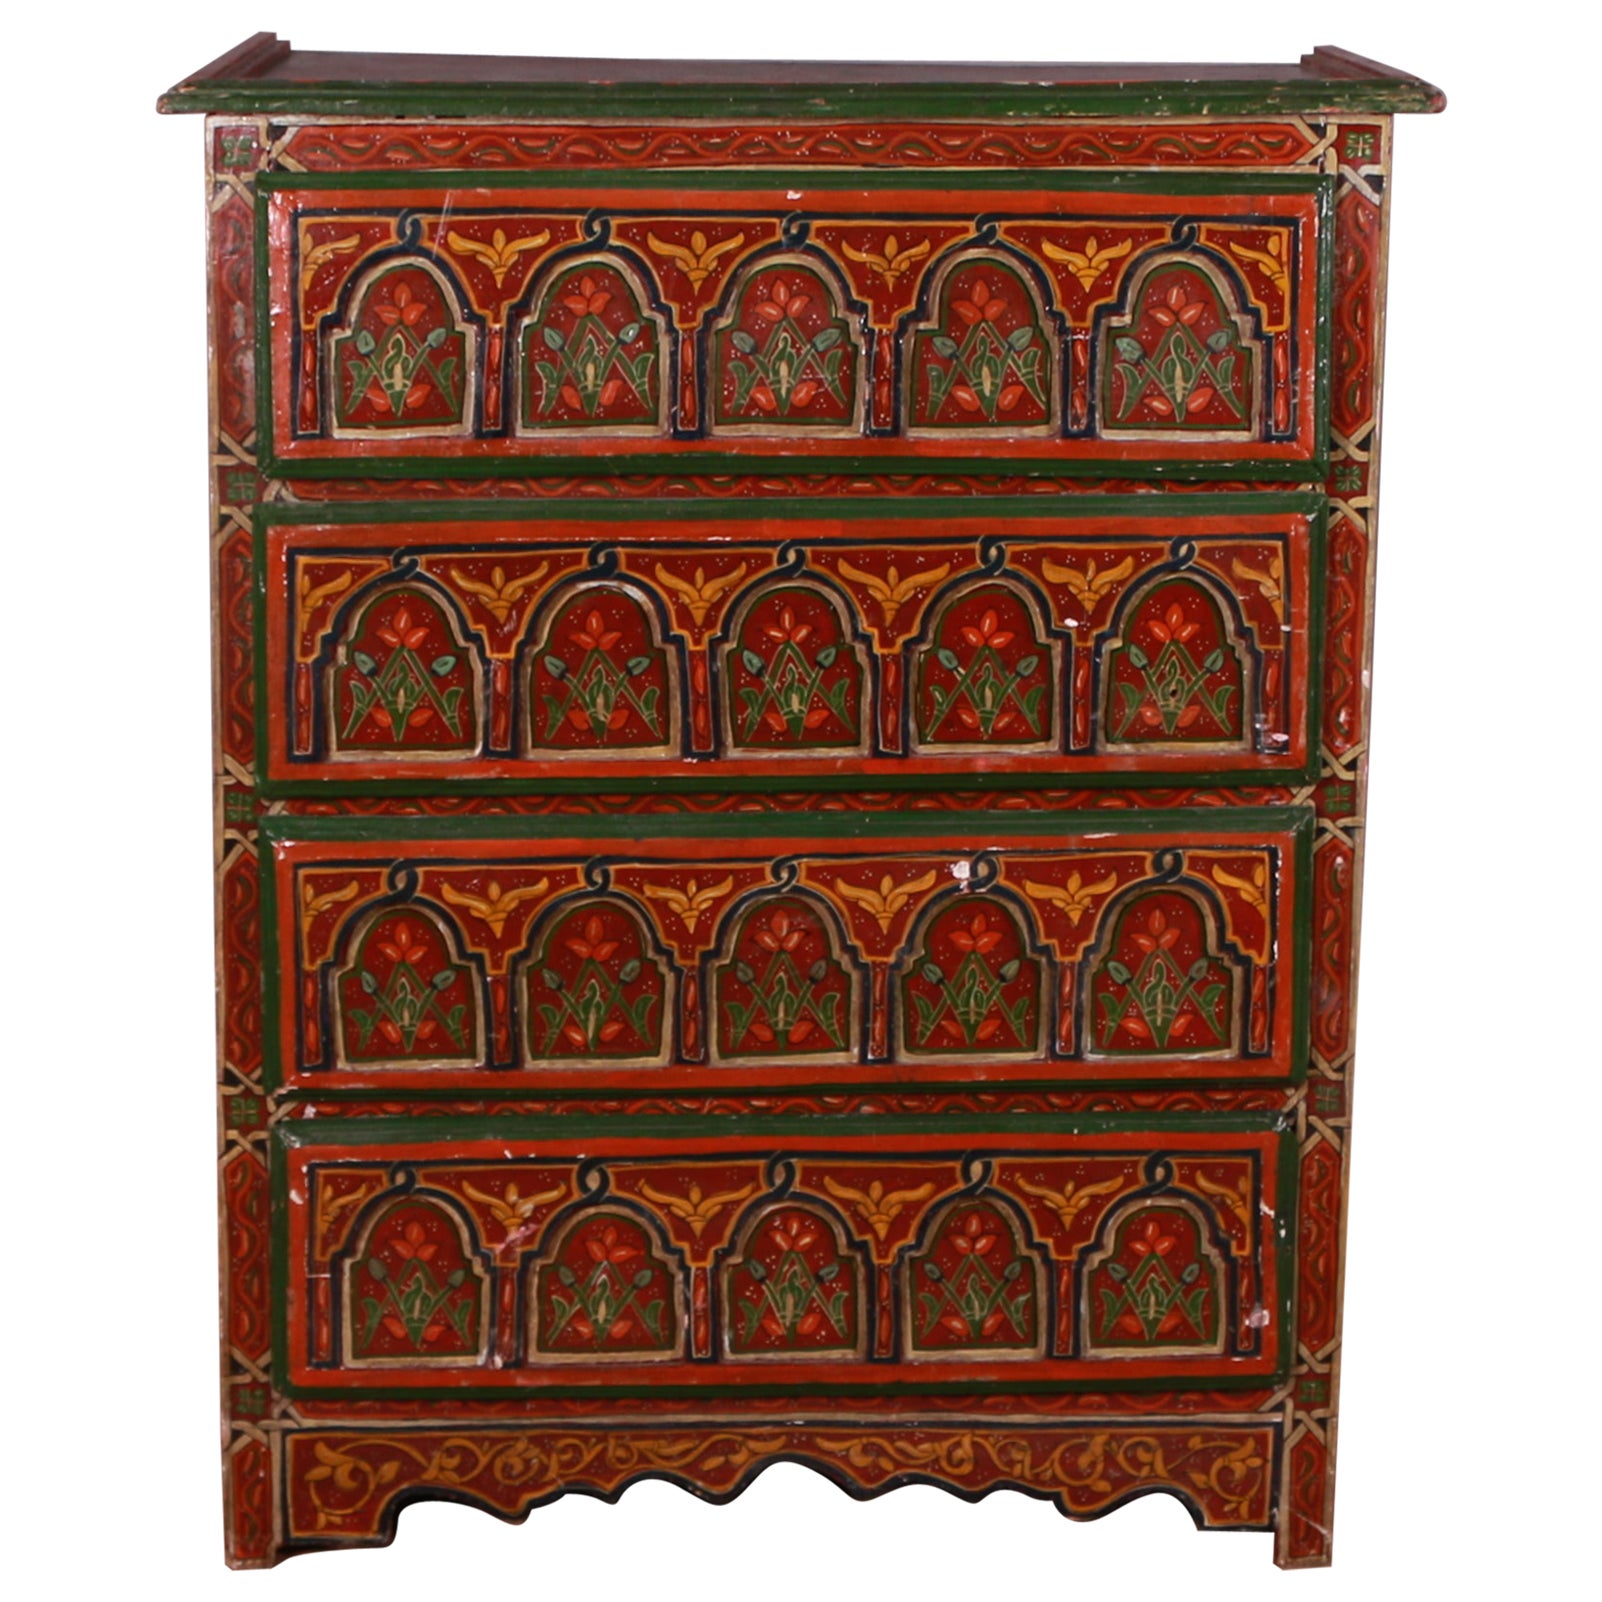 Decorative Moroccan Chest of Drawers